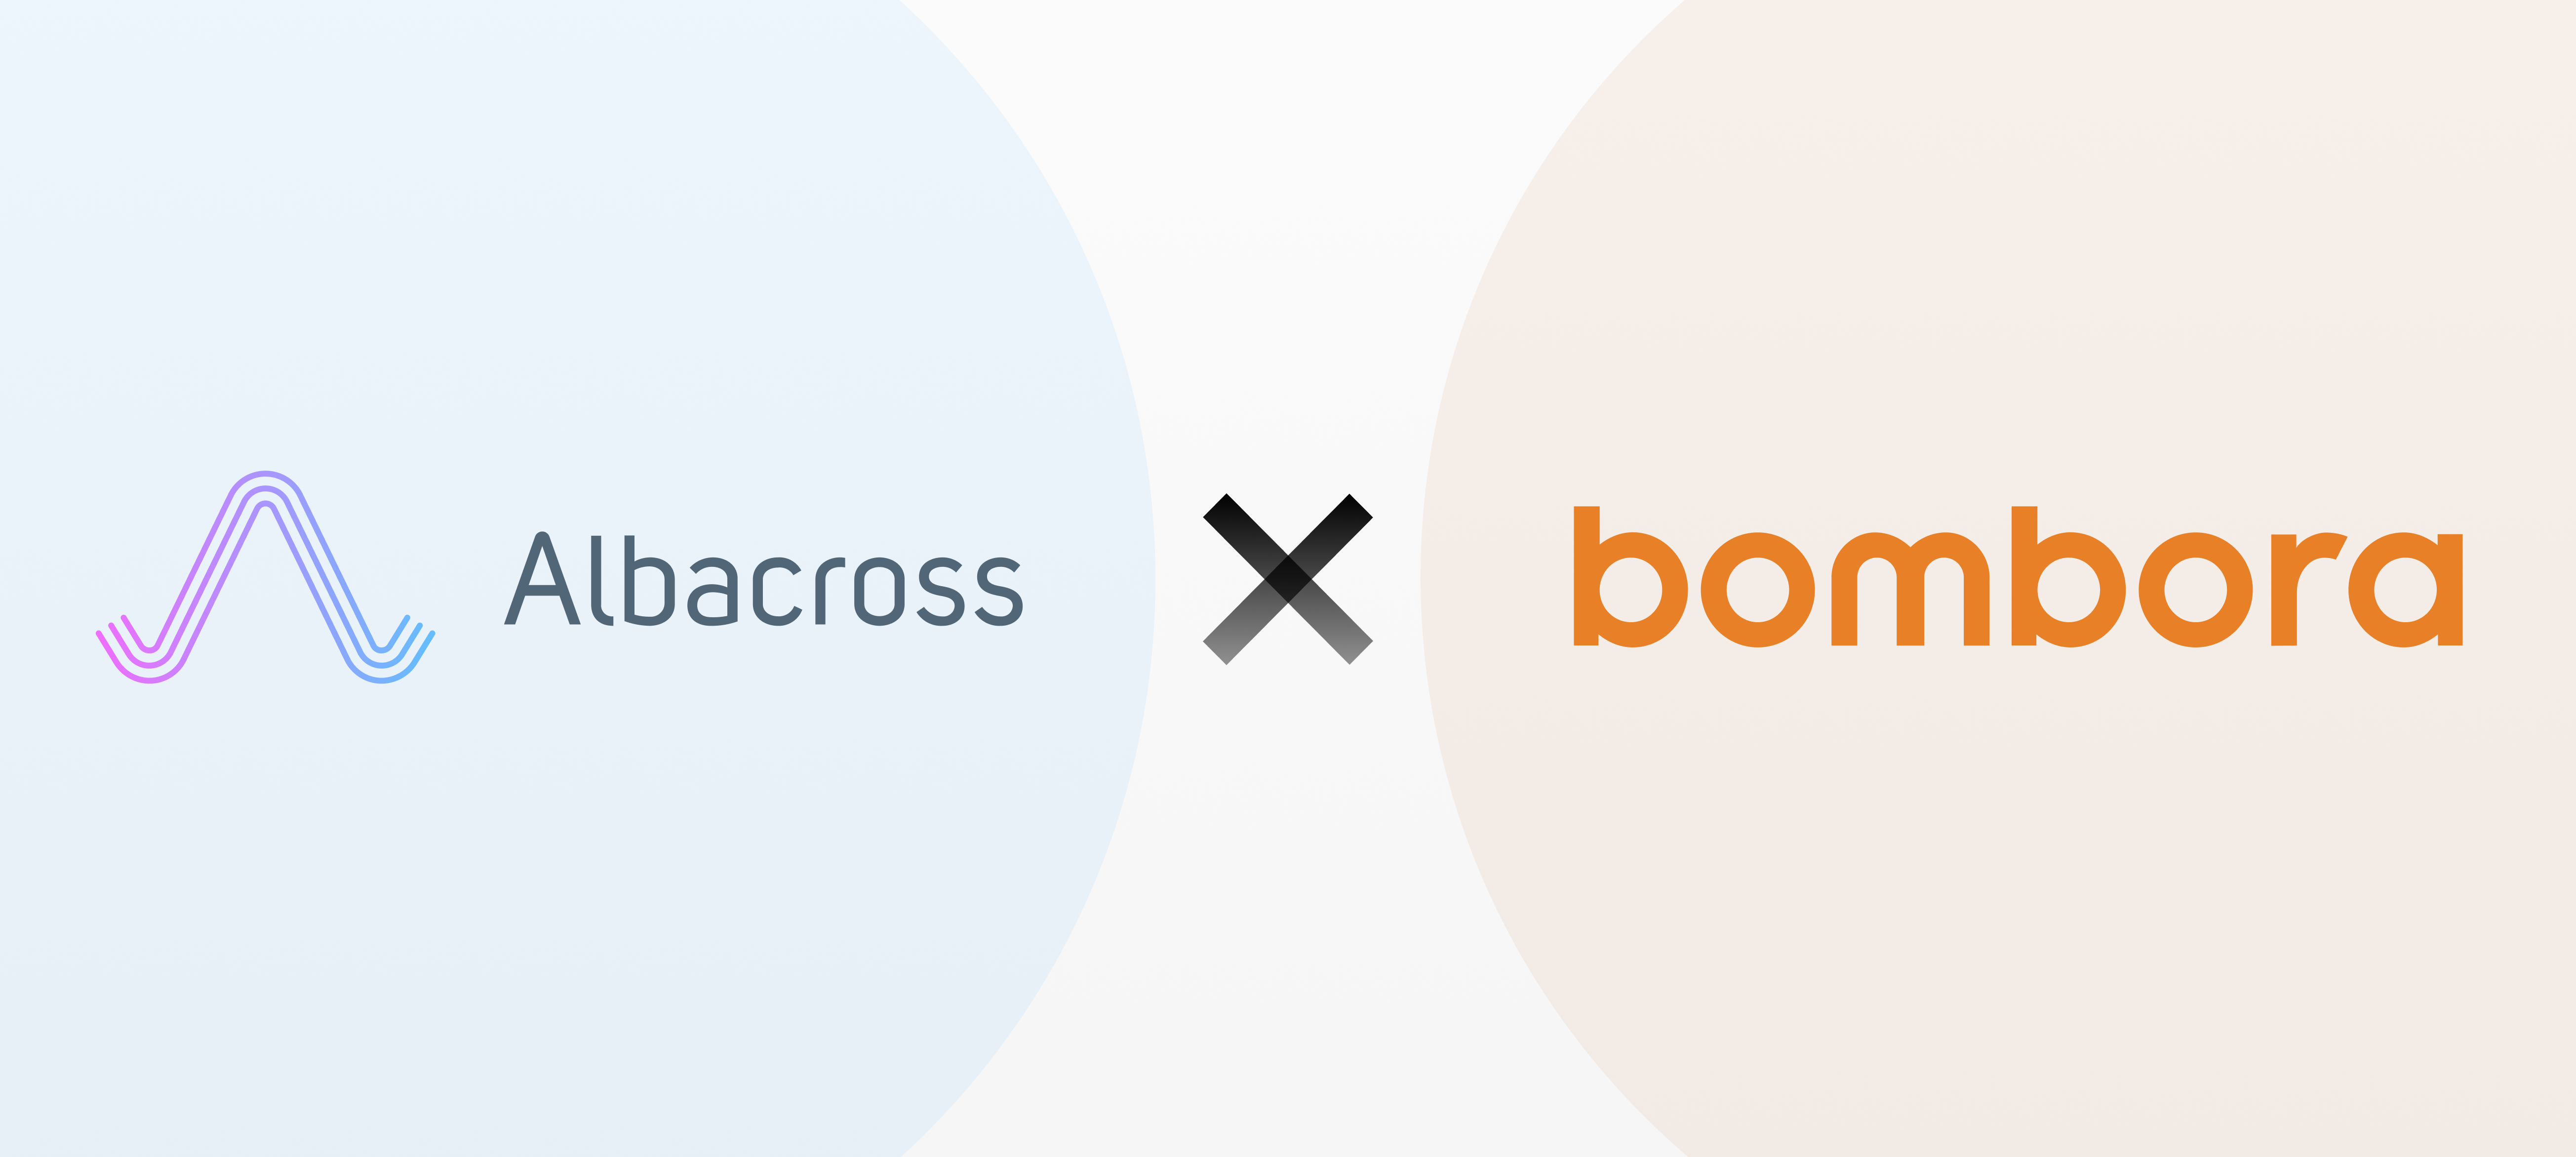 Albacross and Bombora announce partnership to enhance Buyer Intent Data and Account Based Marketing in Europe